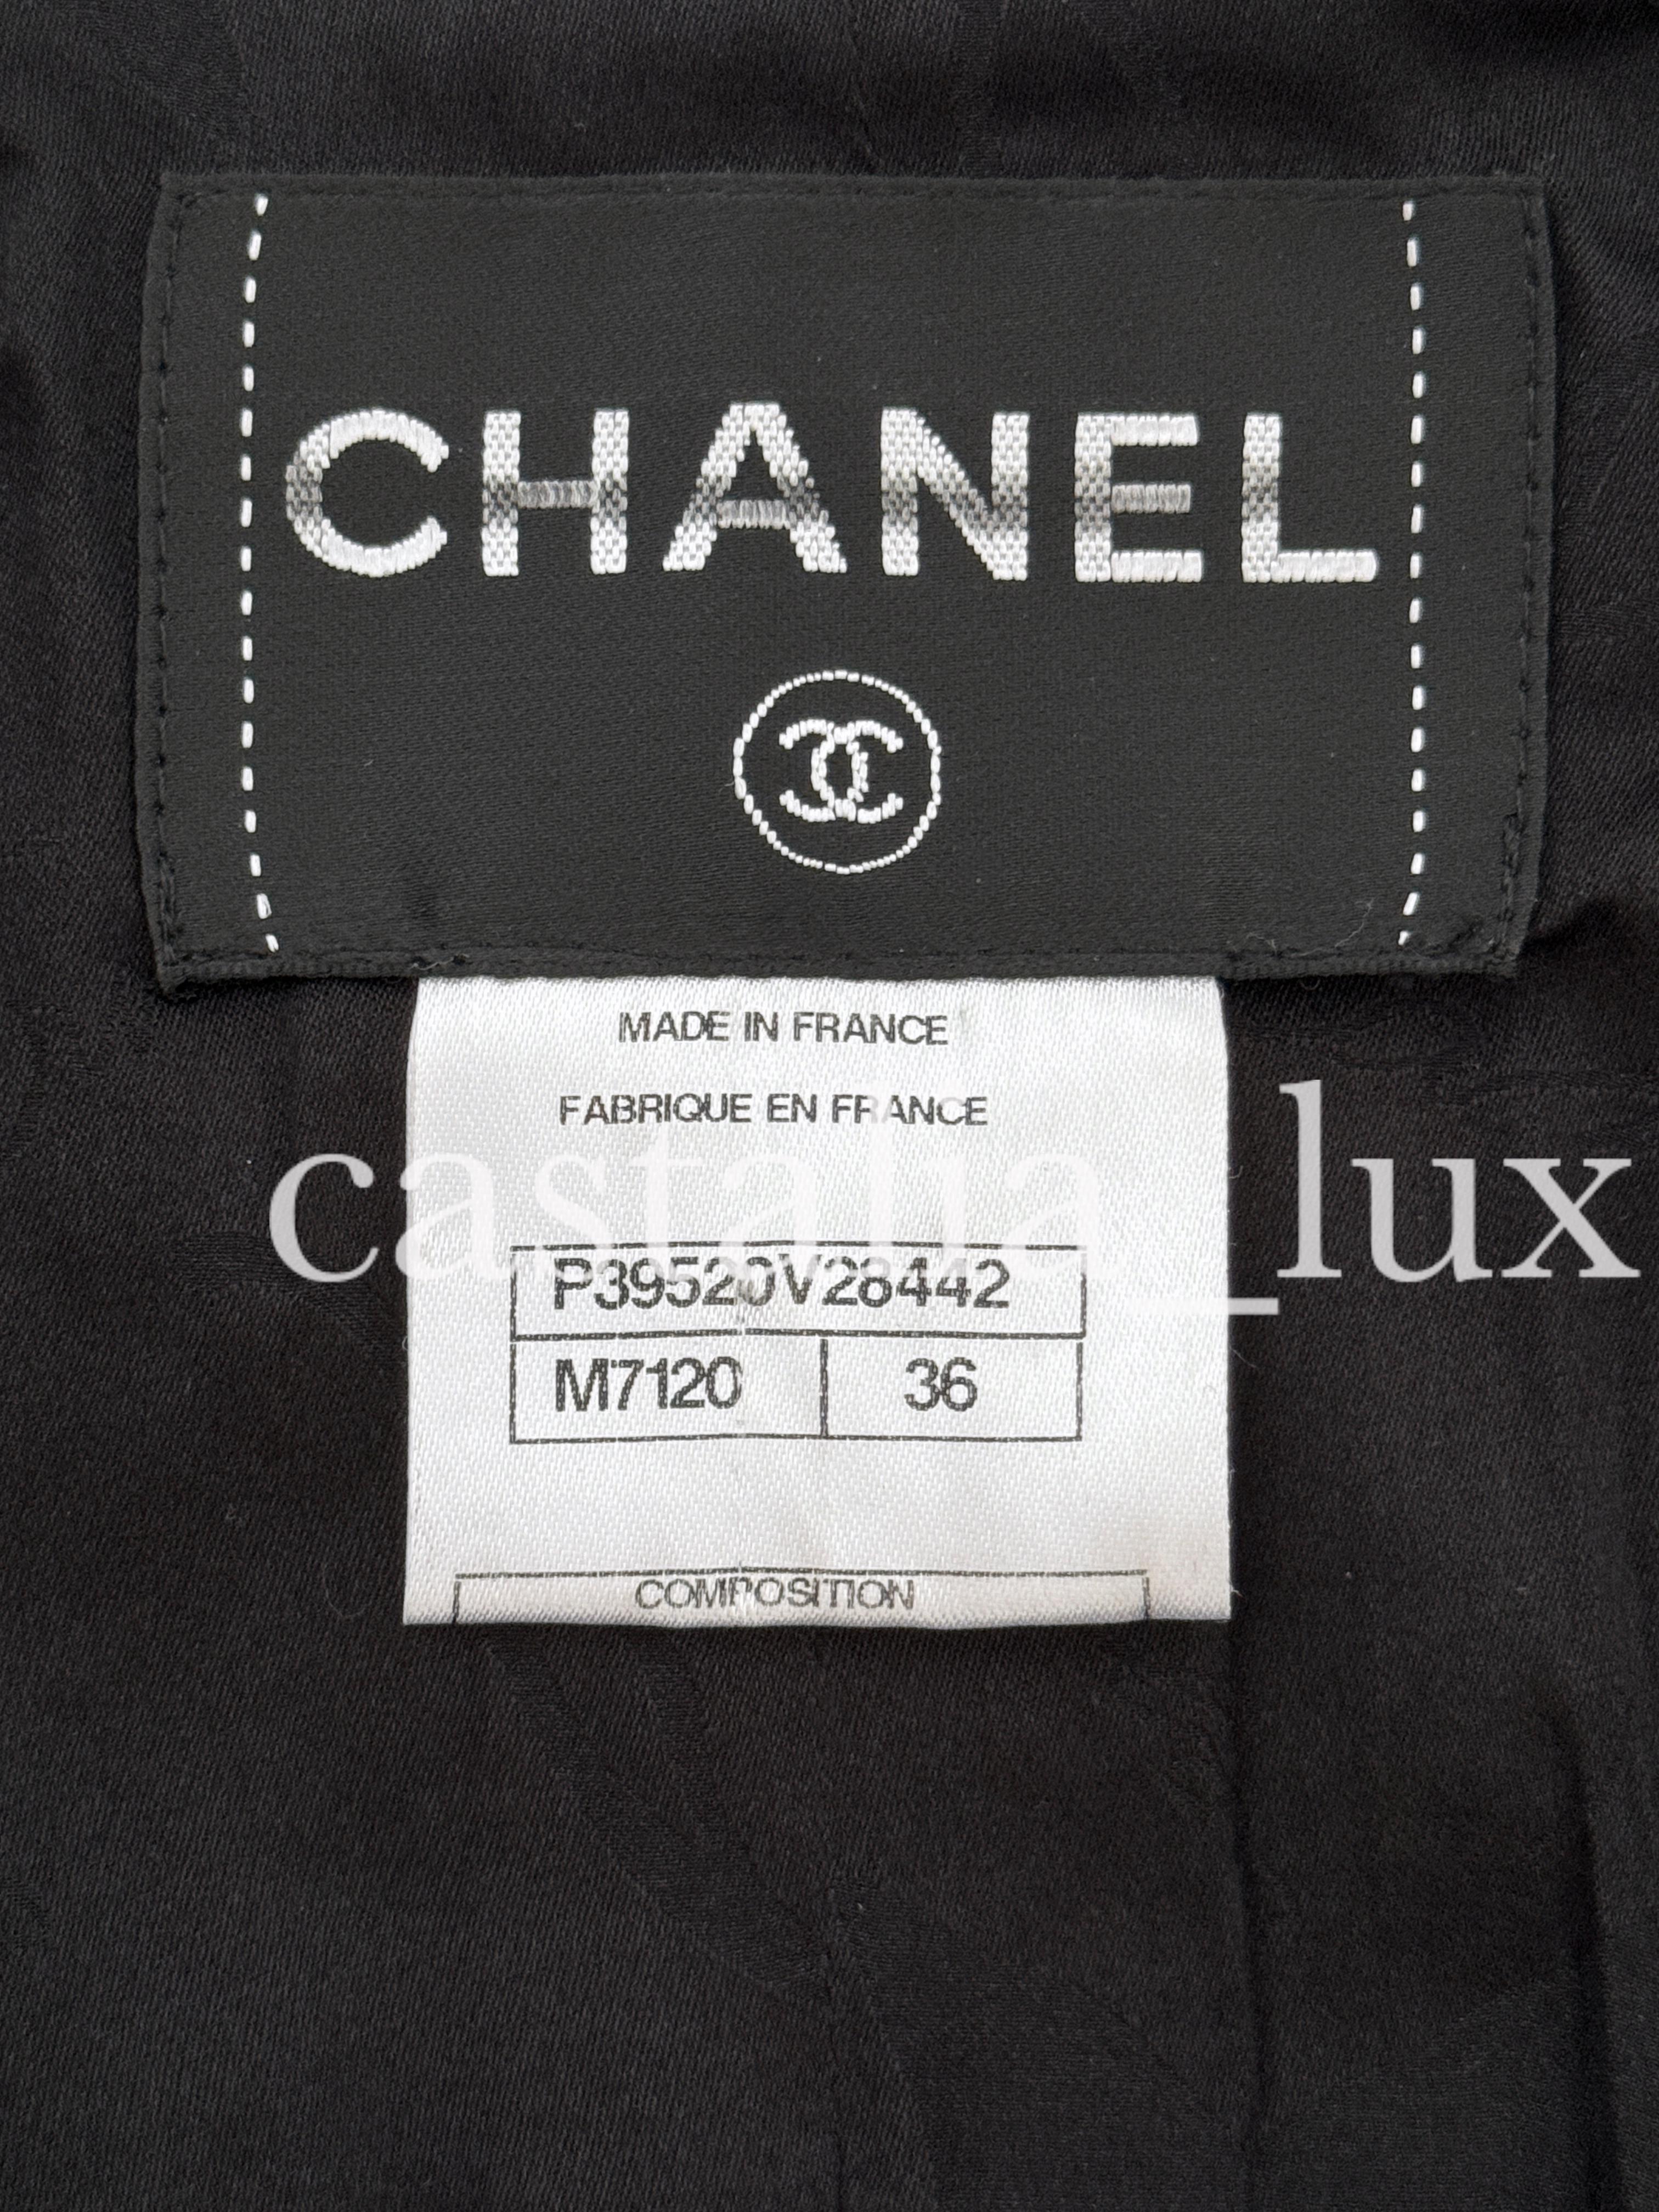 Chanel New Vogue Cover Black Tweed Jacket  For Sale 12